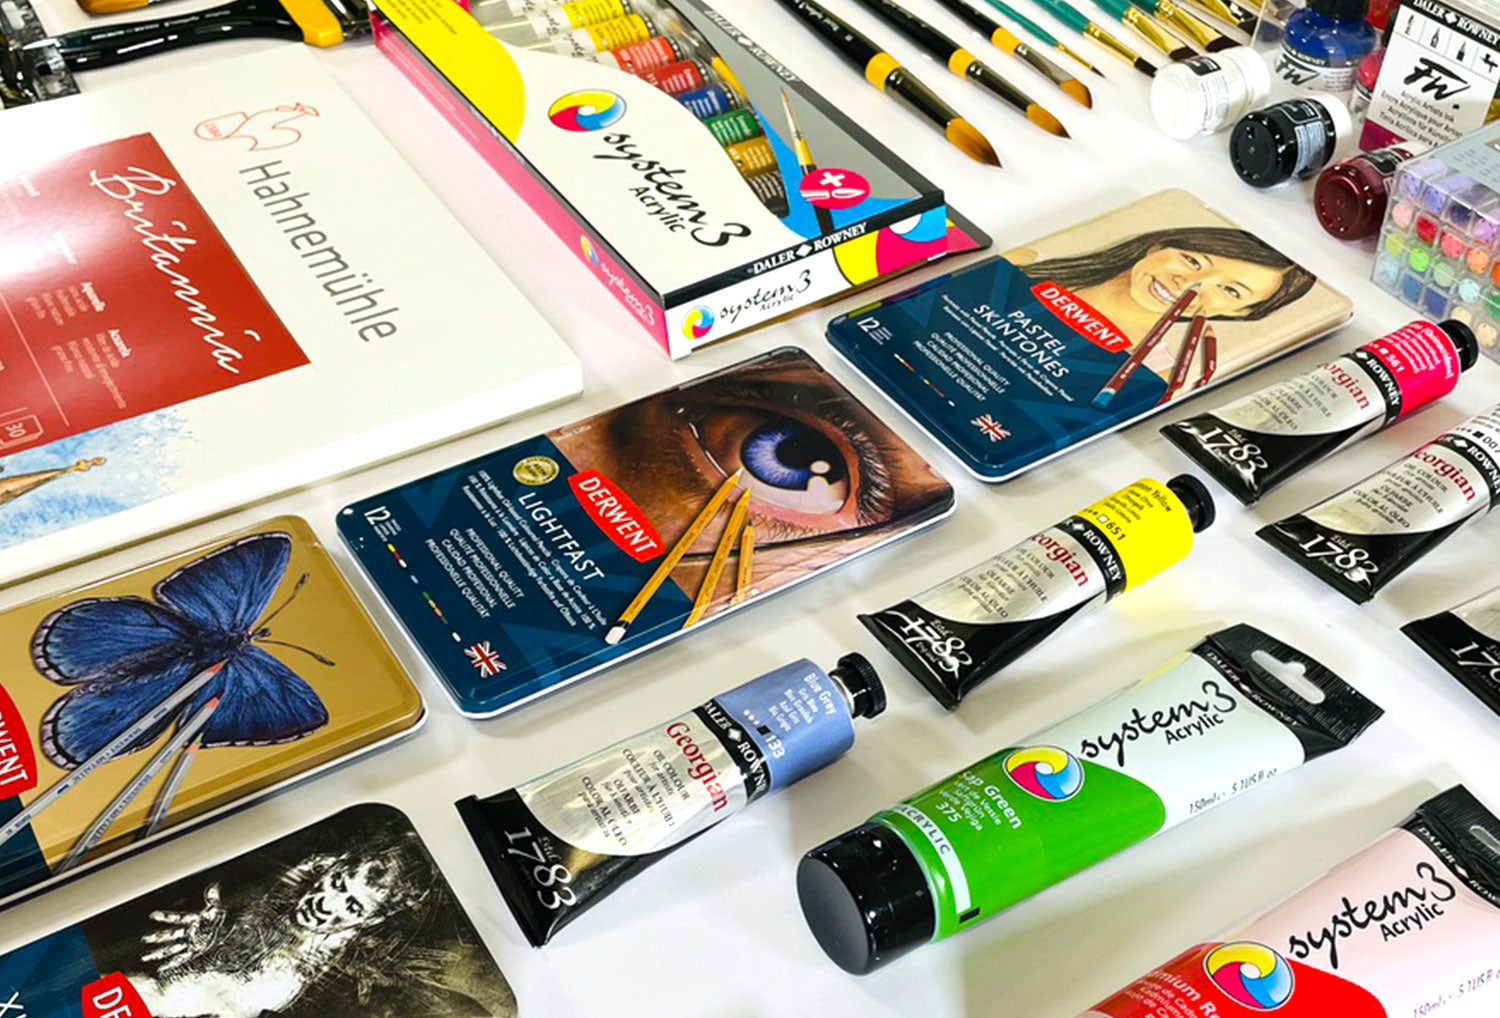 Buy FolkArt Acrylic Paints and Art Supplies from Crafty Arts UK